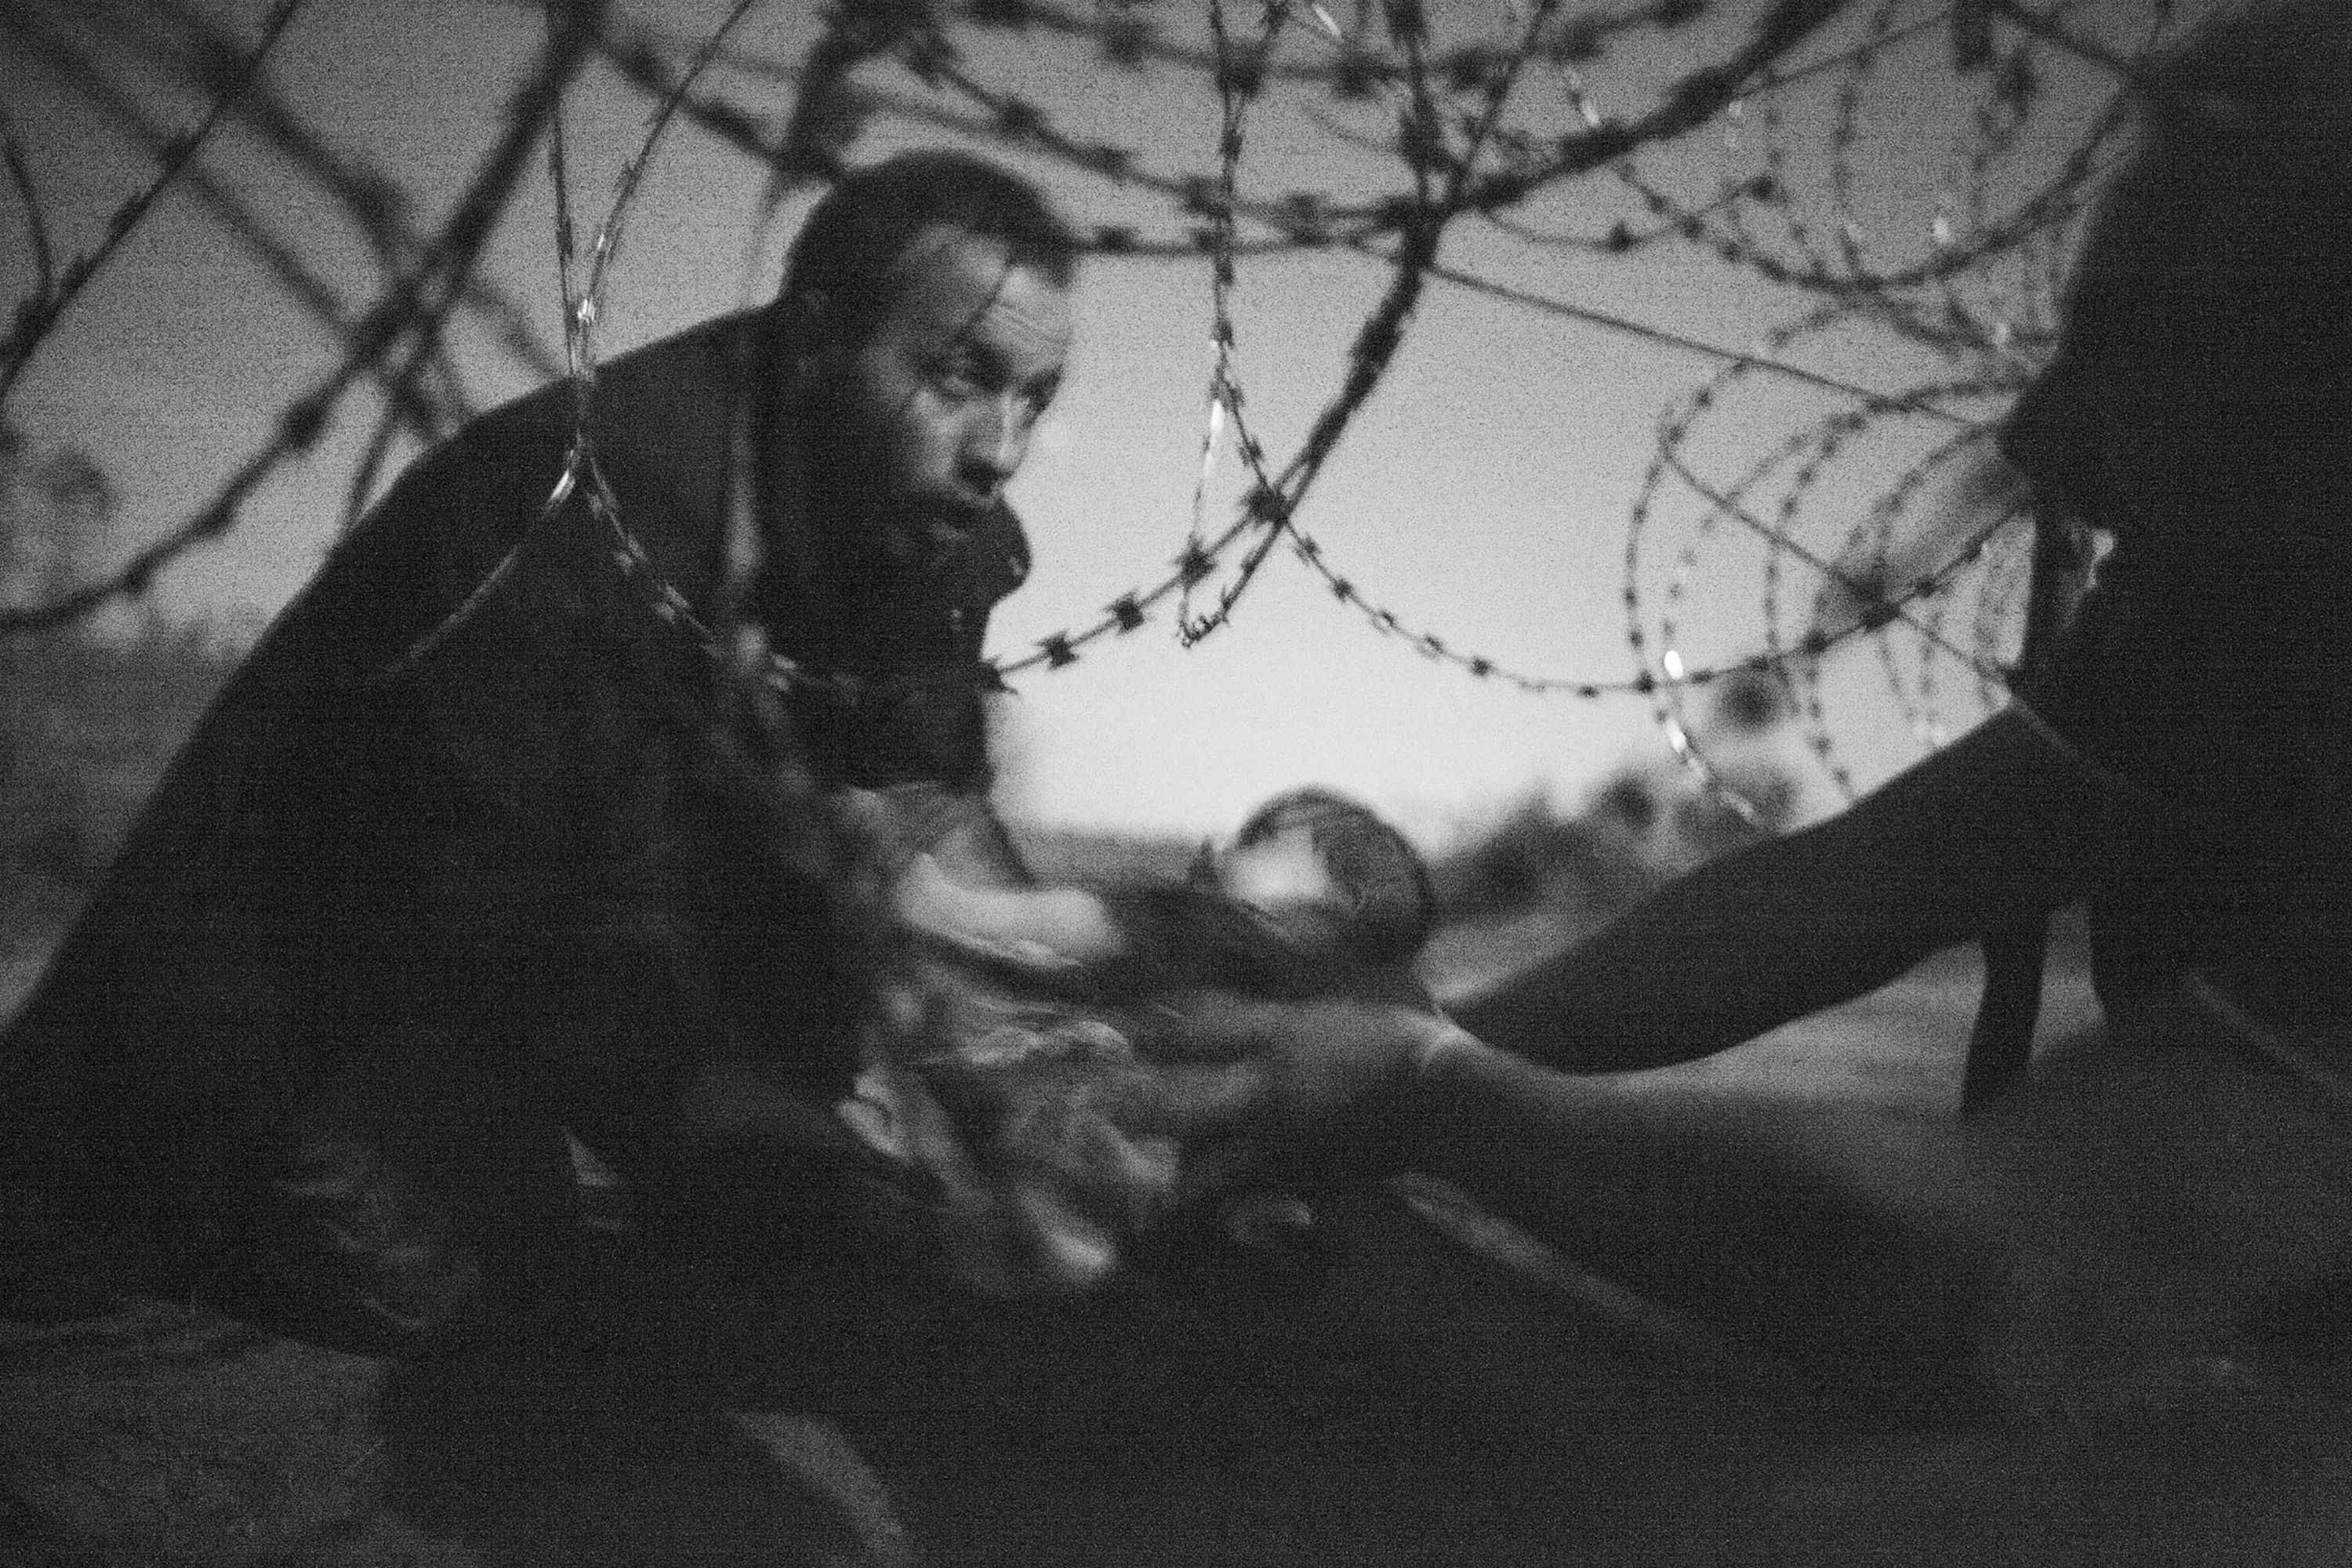 Hope for a New Life, guanyador del World Press Photo of the Year. Autor: Warren Richardson